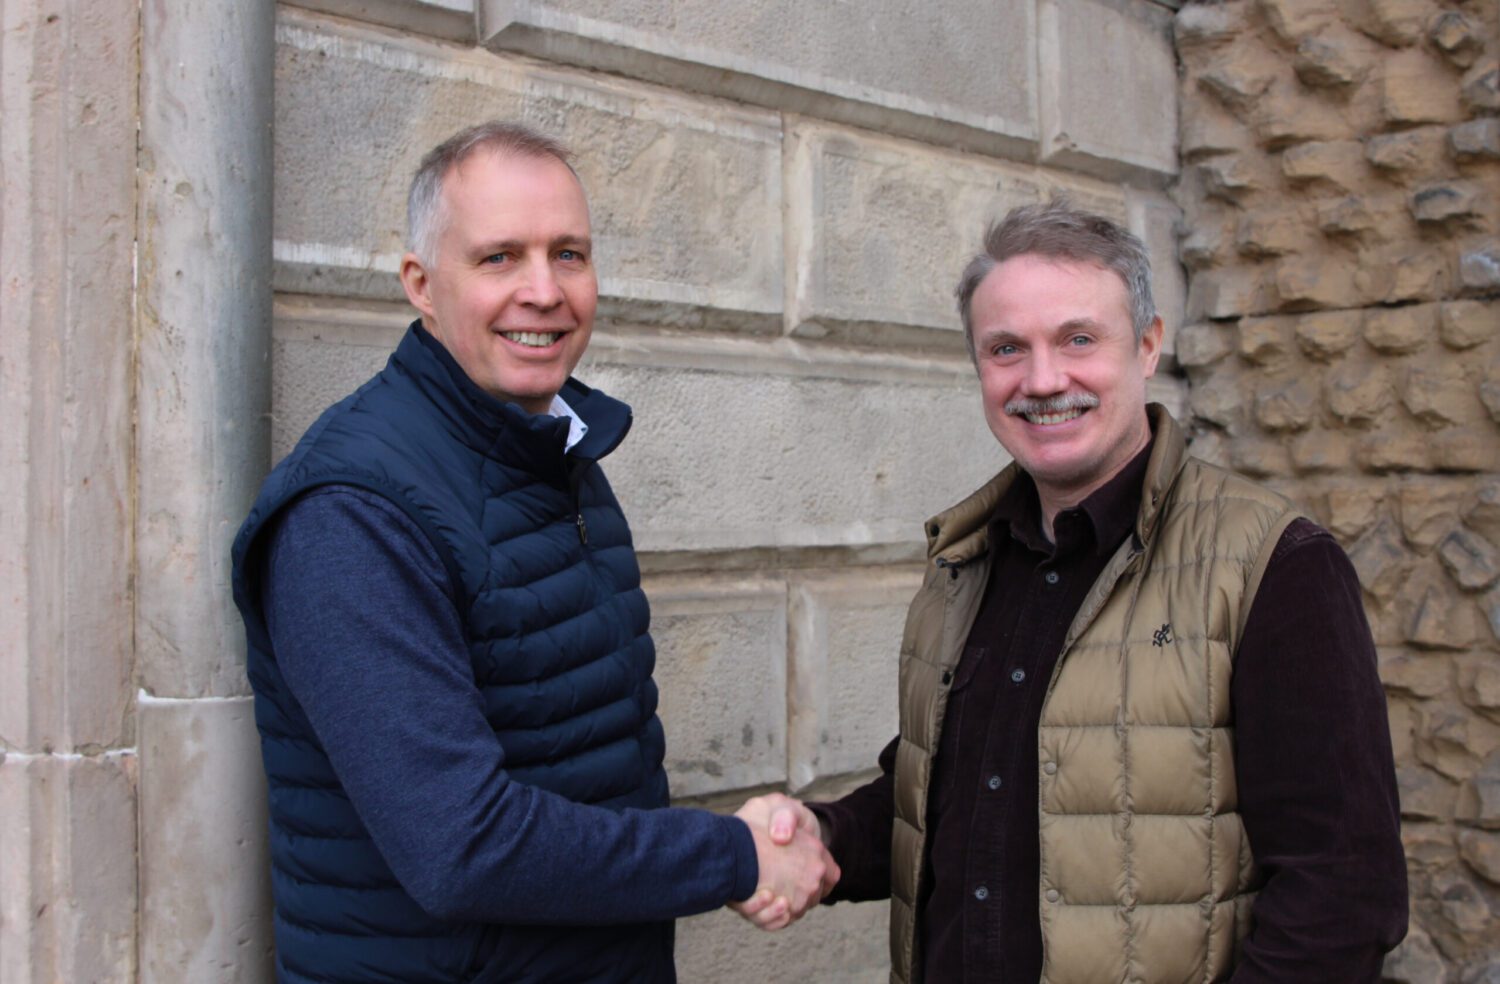 Brightwater Press Release. Left: Roger Green, Spotless Founder Right: Tom Barberton, Brightwater Managing Director